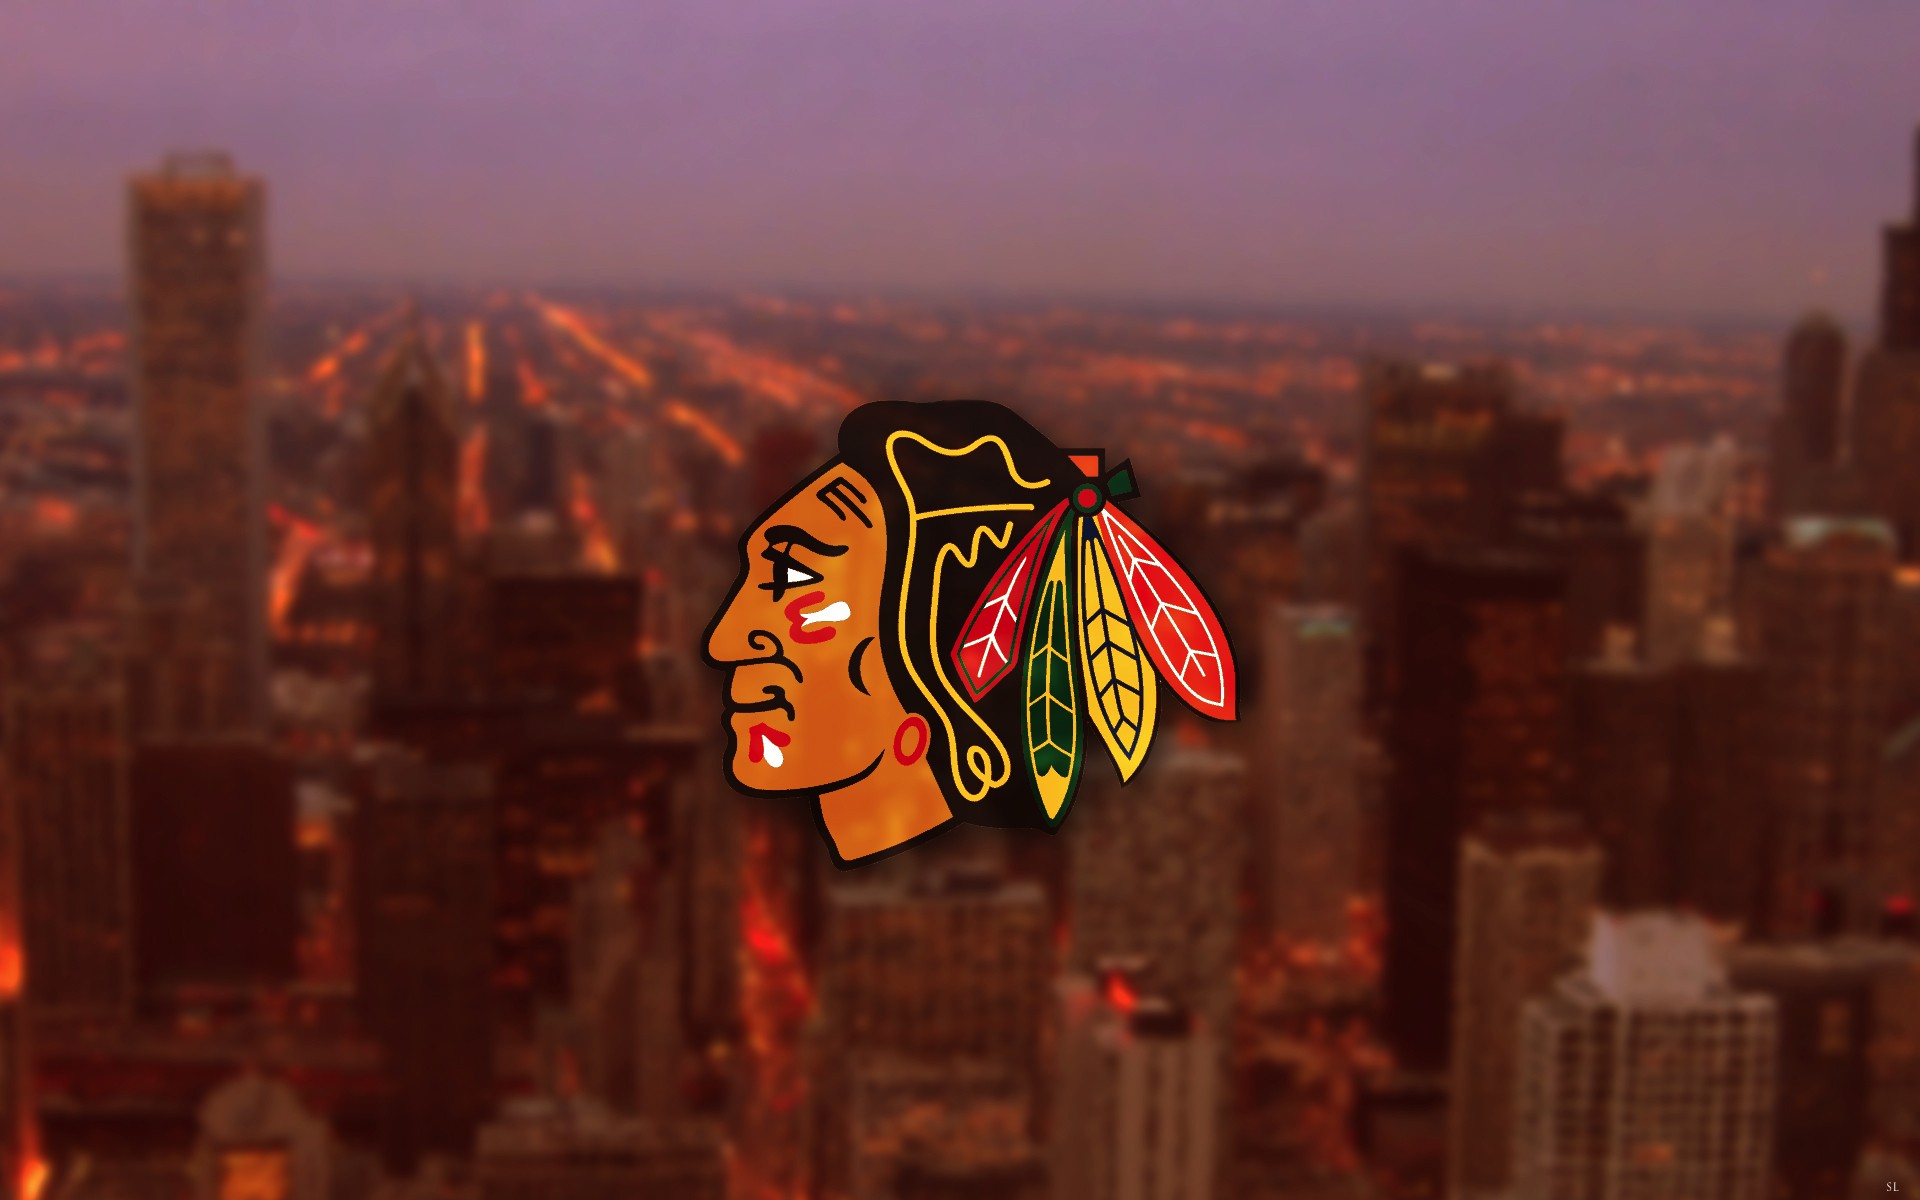 Blackhawks wallpaper ·① Download free cool full HD wallpapers for